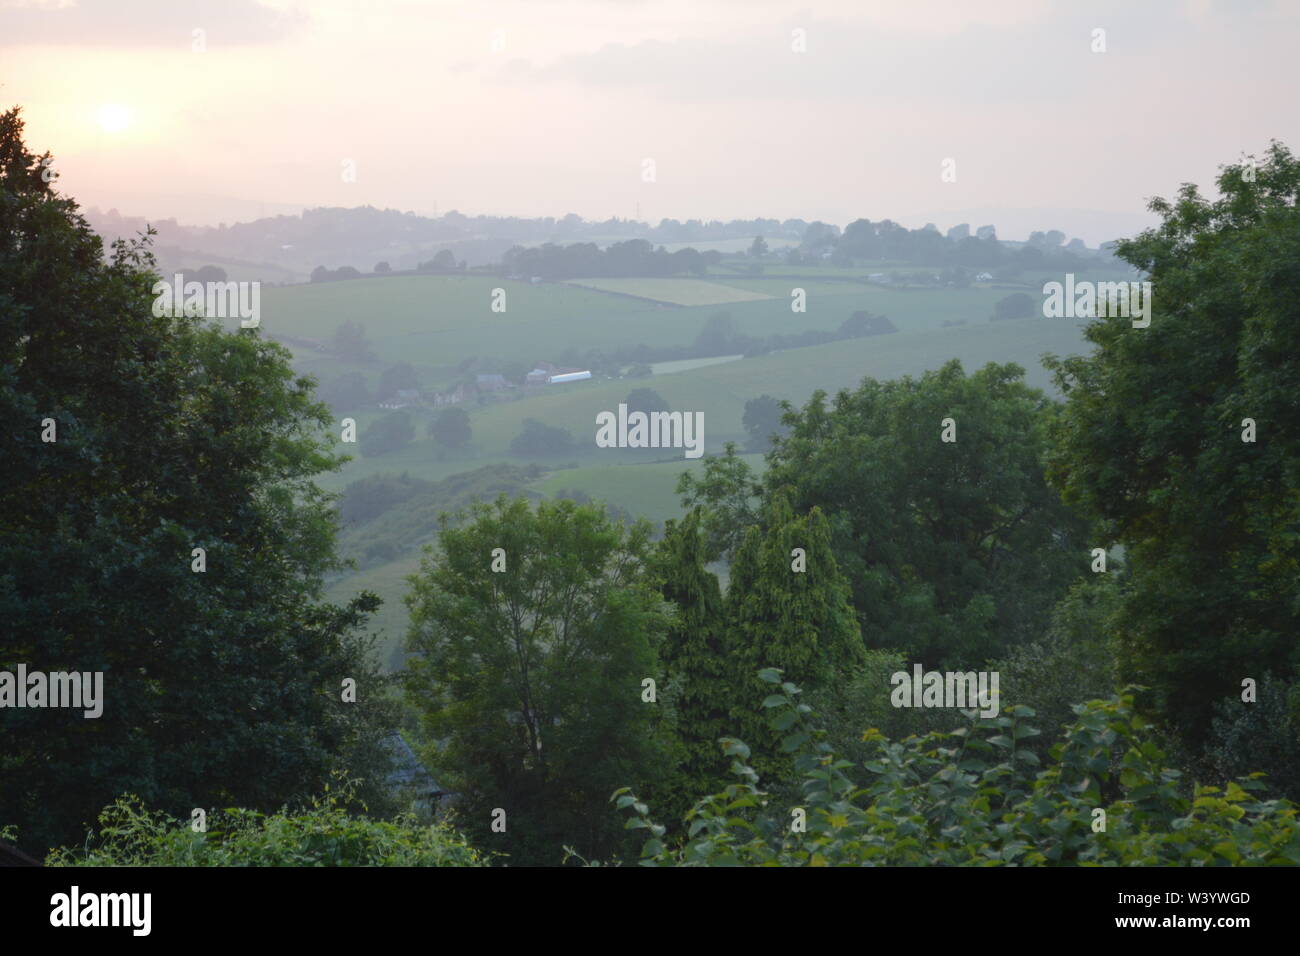 View from a hillside across trees towards open hilly countryside with summer sun low in cloudy sky The Doward South Herefordshire England UK Stock Photo